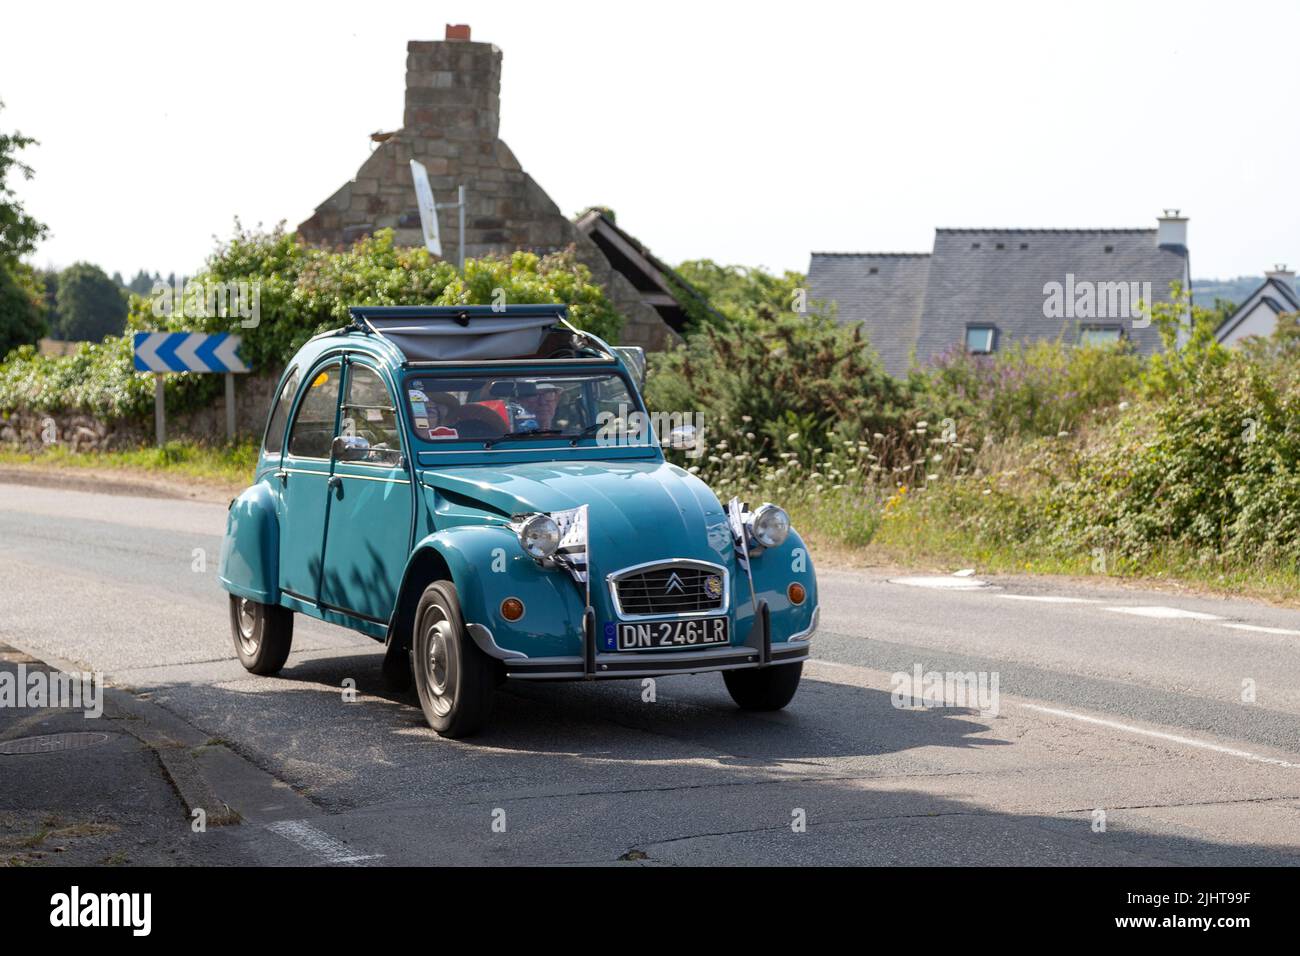 Kerlaz, France - July 17 2022: Retired couple cruising in a green Citroën 2CV with two Breton flag in the front. Stock Photo